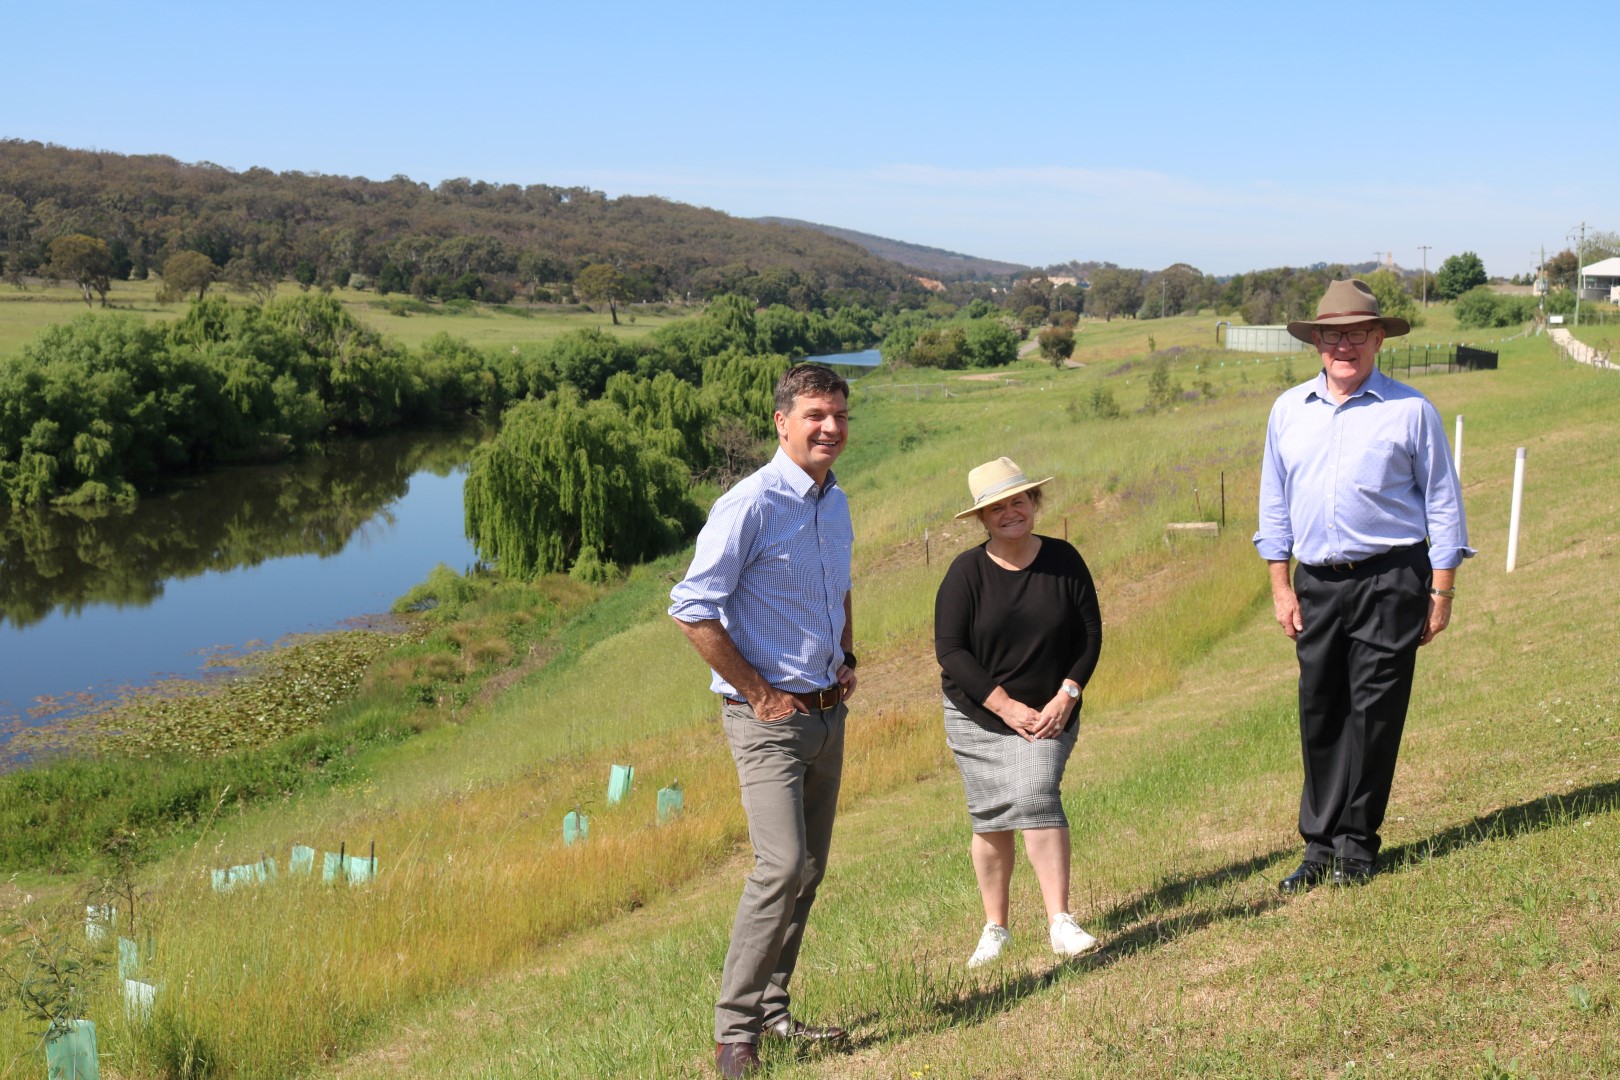 Wollondilly Walking Track moves to second phase of $2 million upgrade